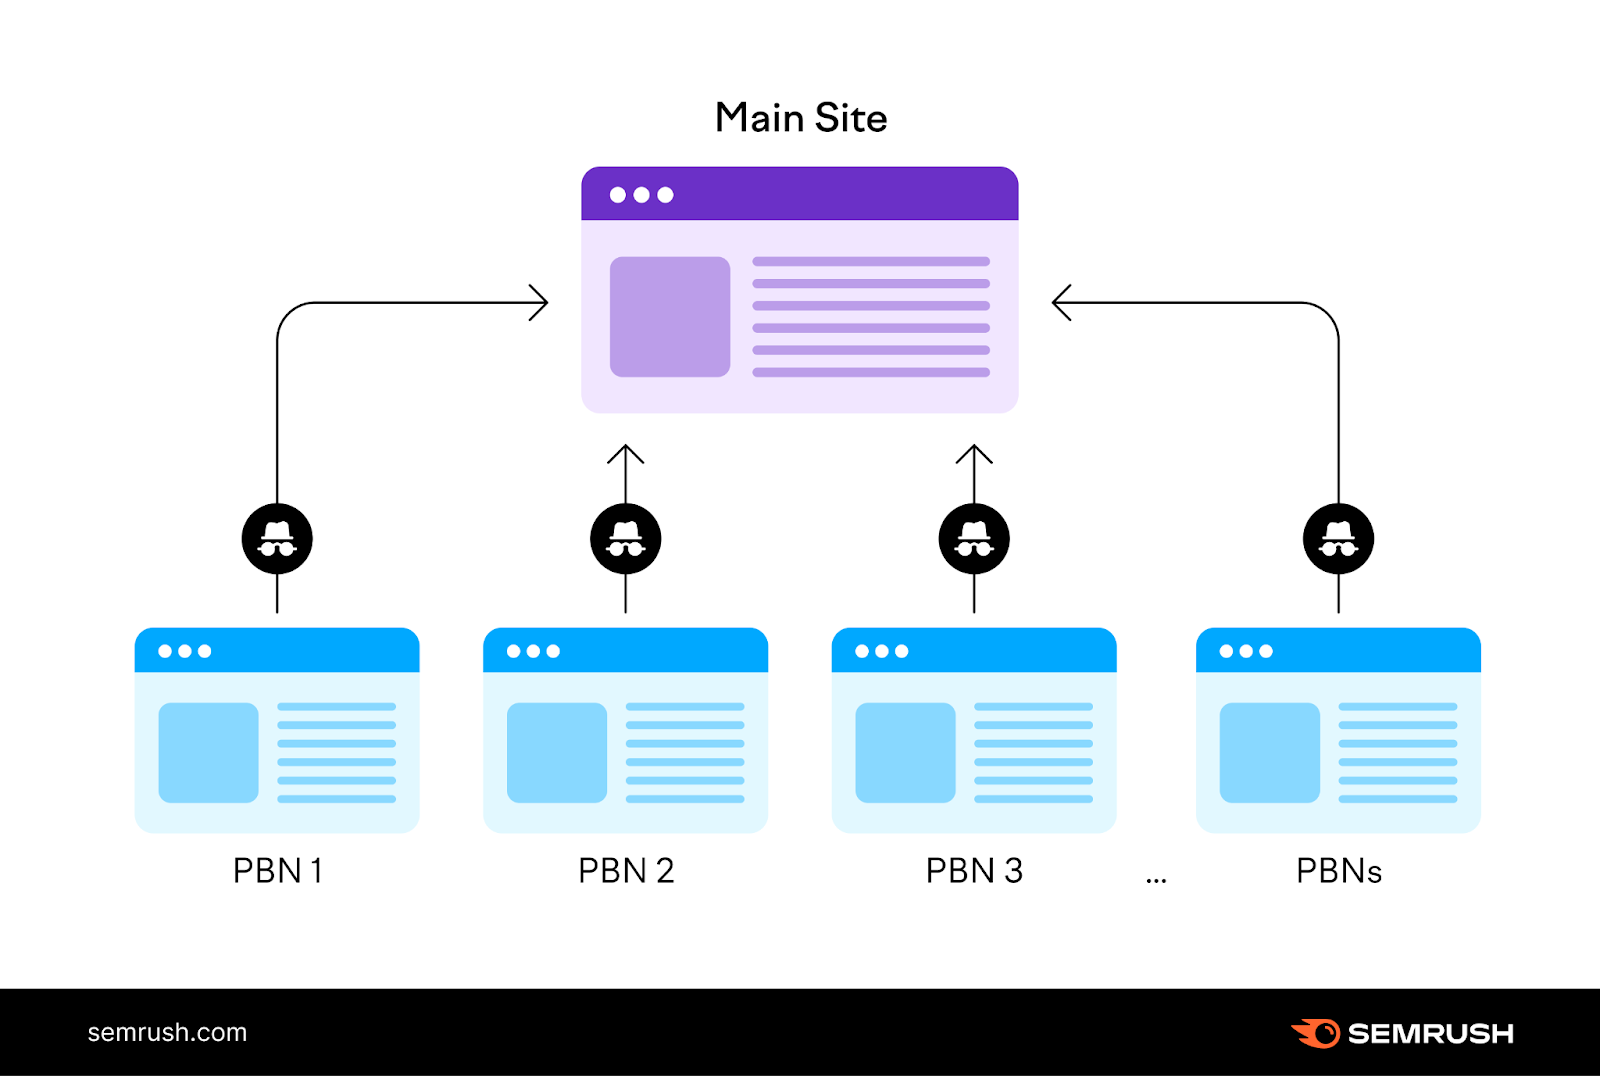 A visual presentation of a main site and PBNs linking to it